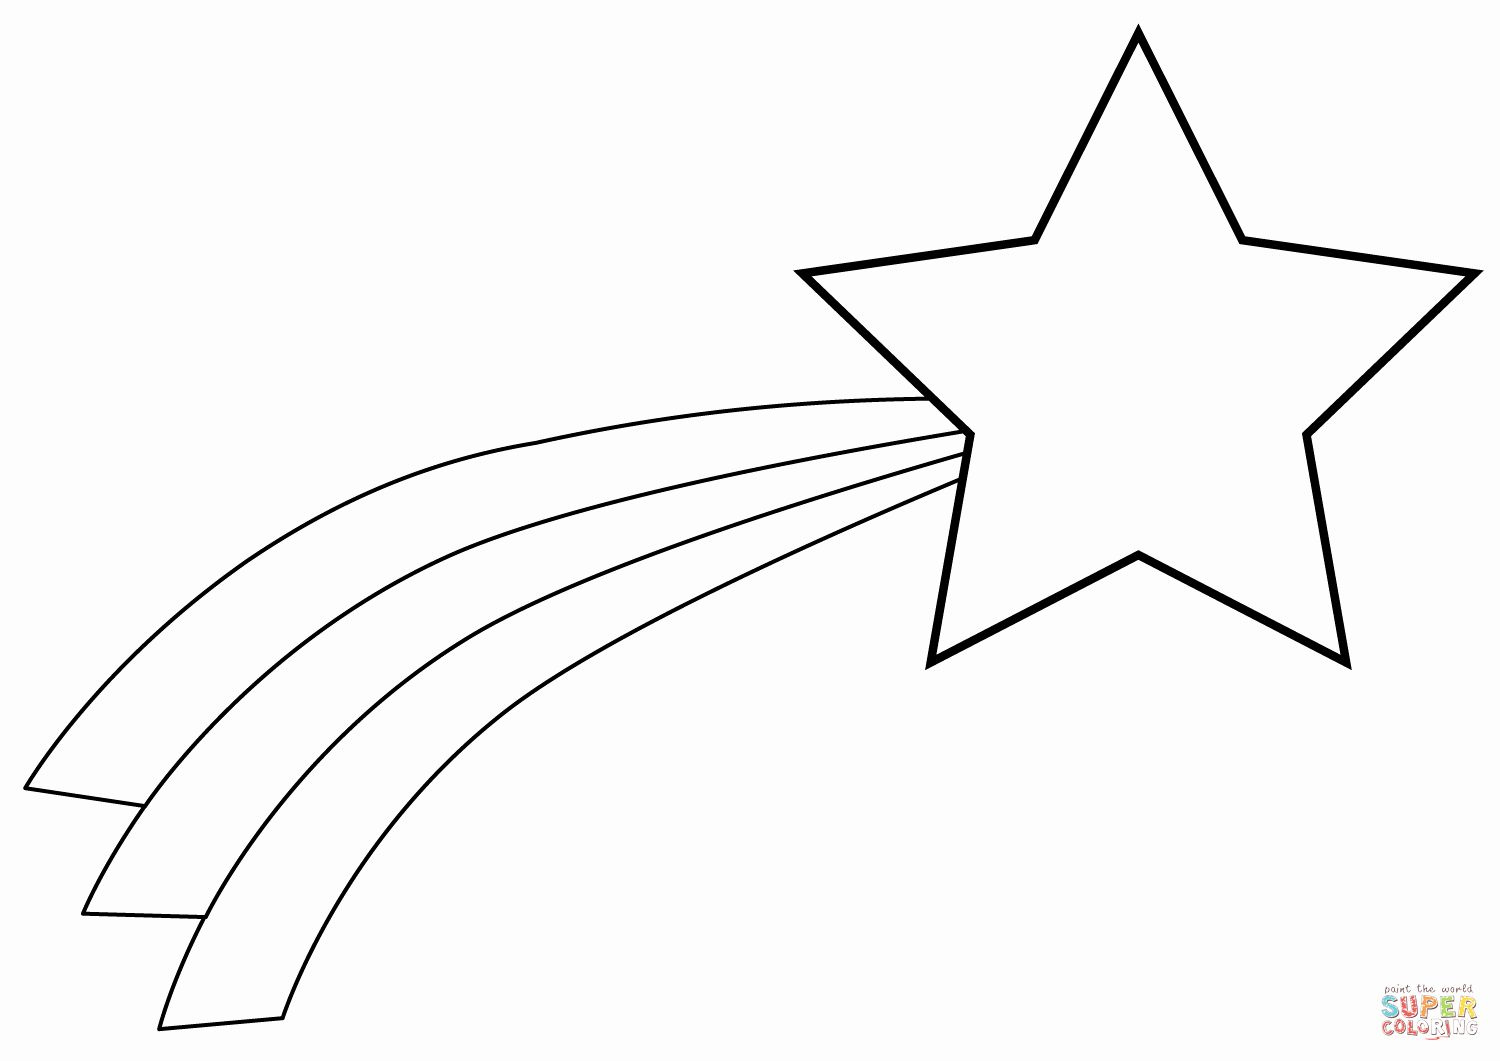 32 Shooting Star Coloring Page In 2020 Star Coloring Pages Super 